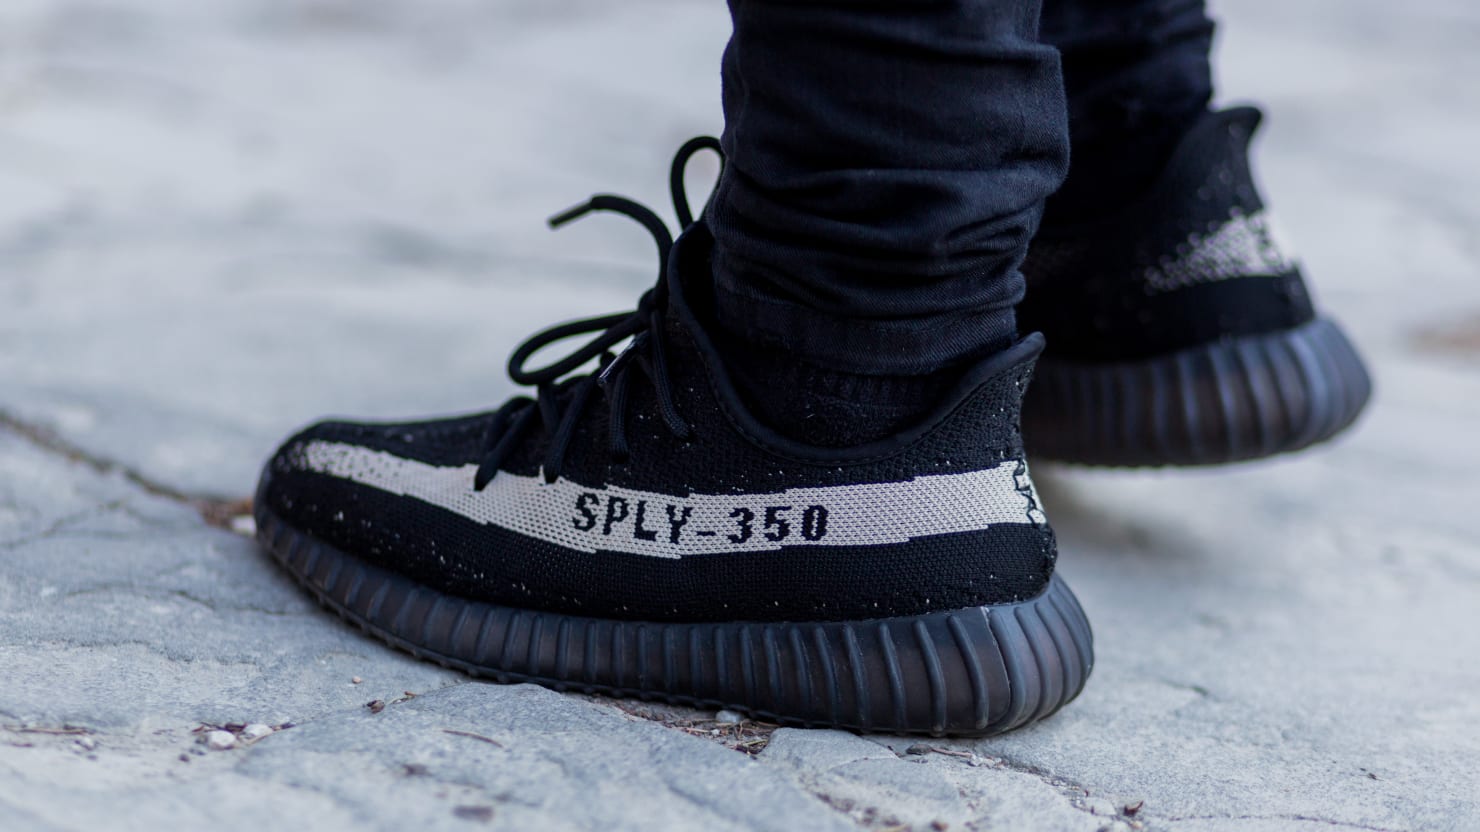 Adidas Yeezy Boosts Are Now Customizable